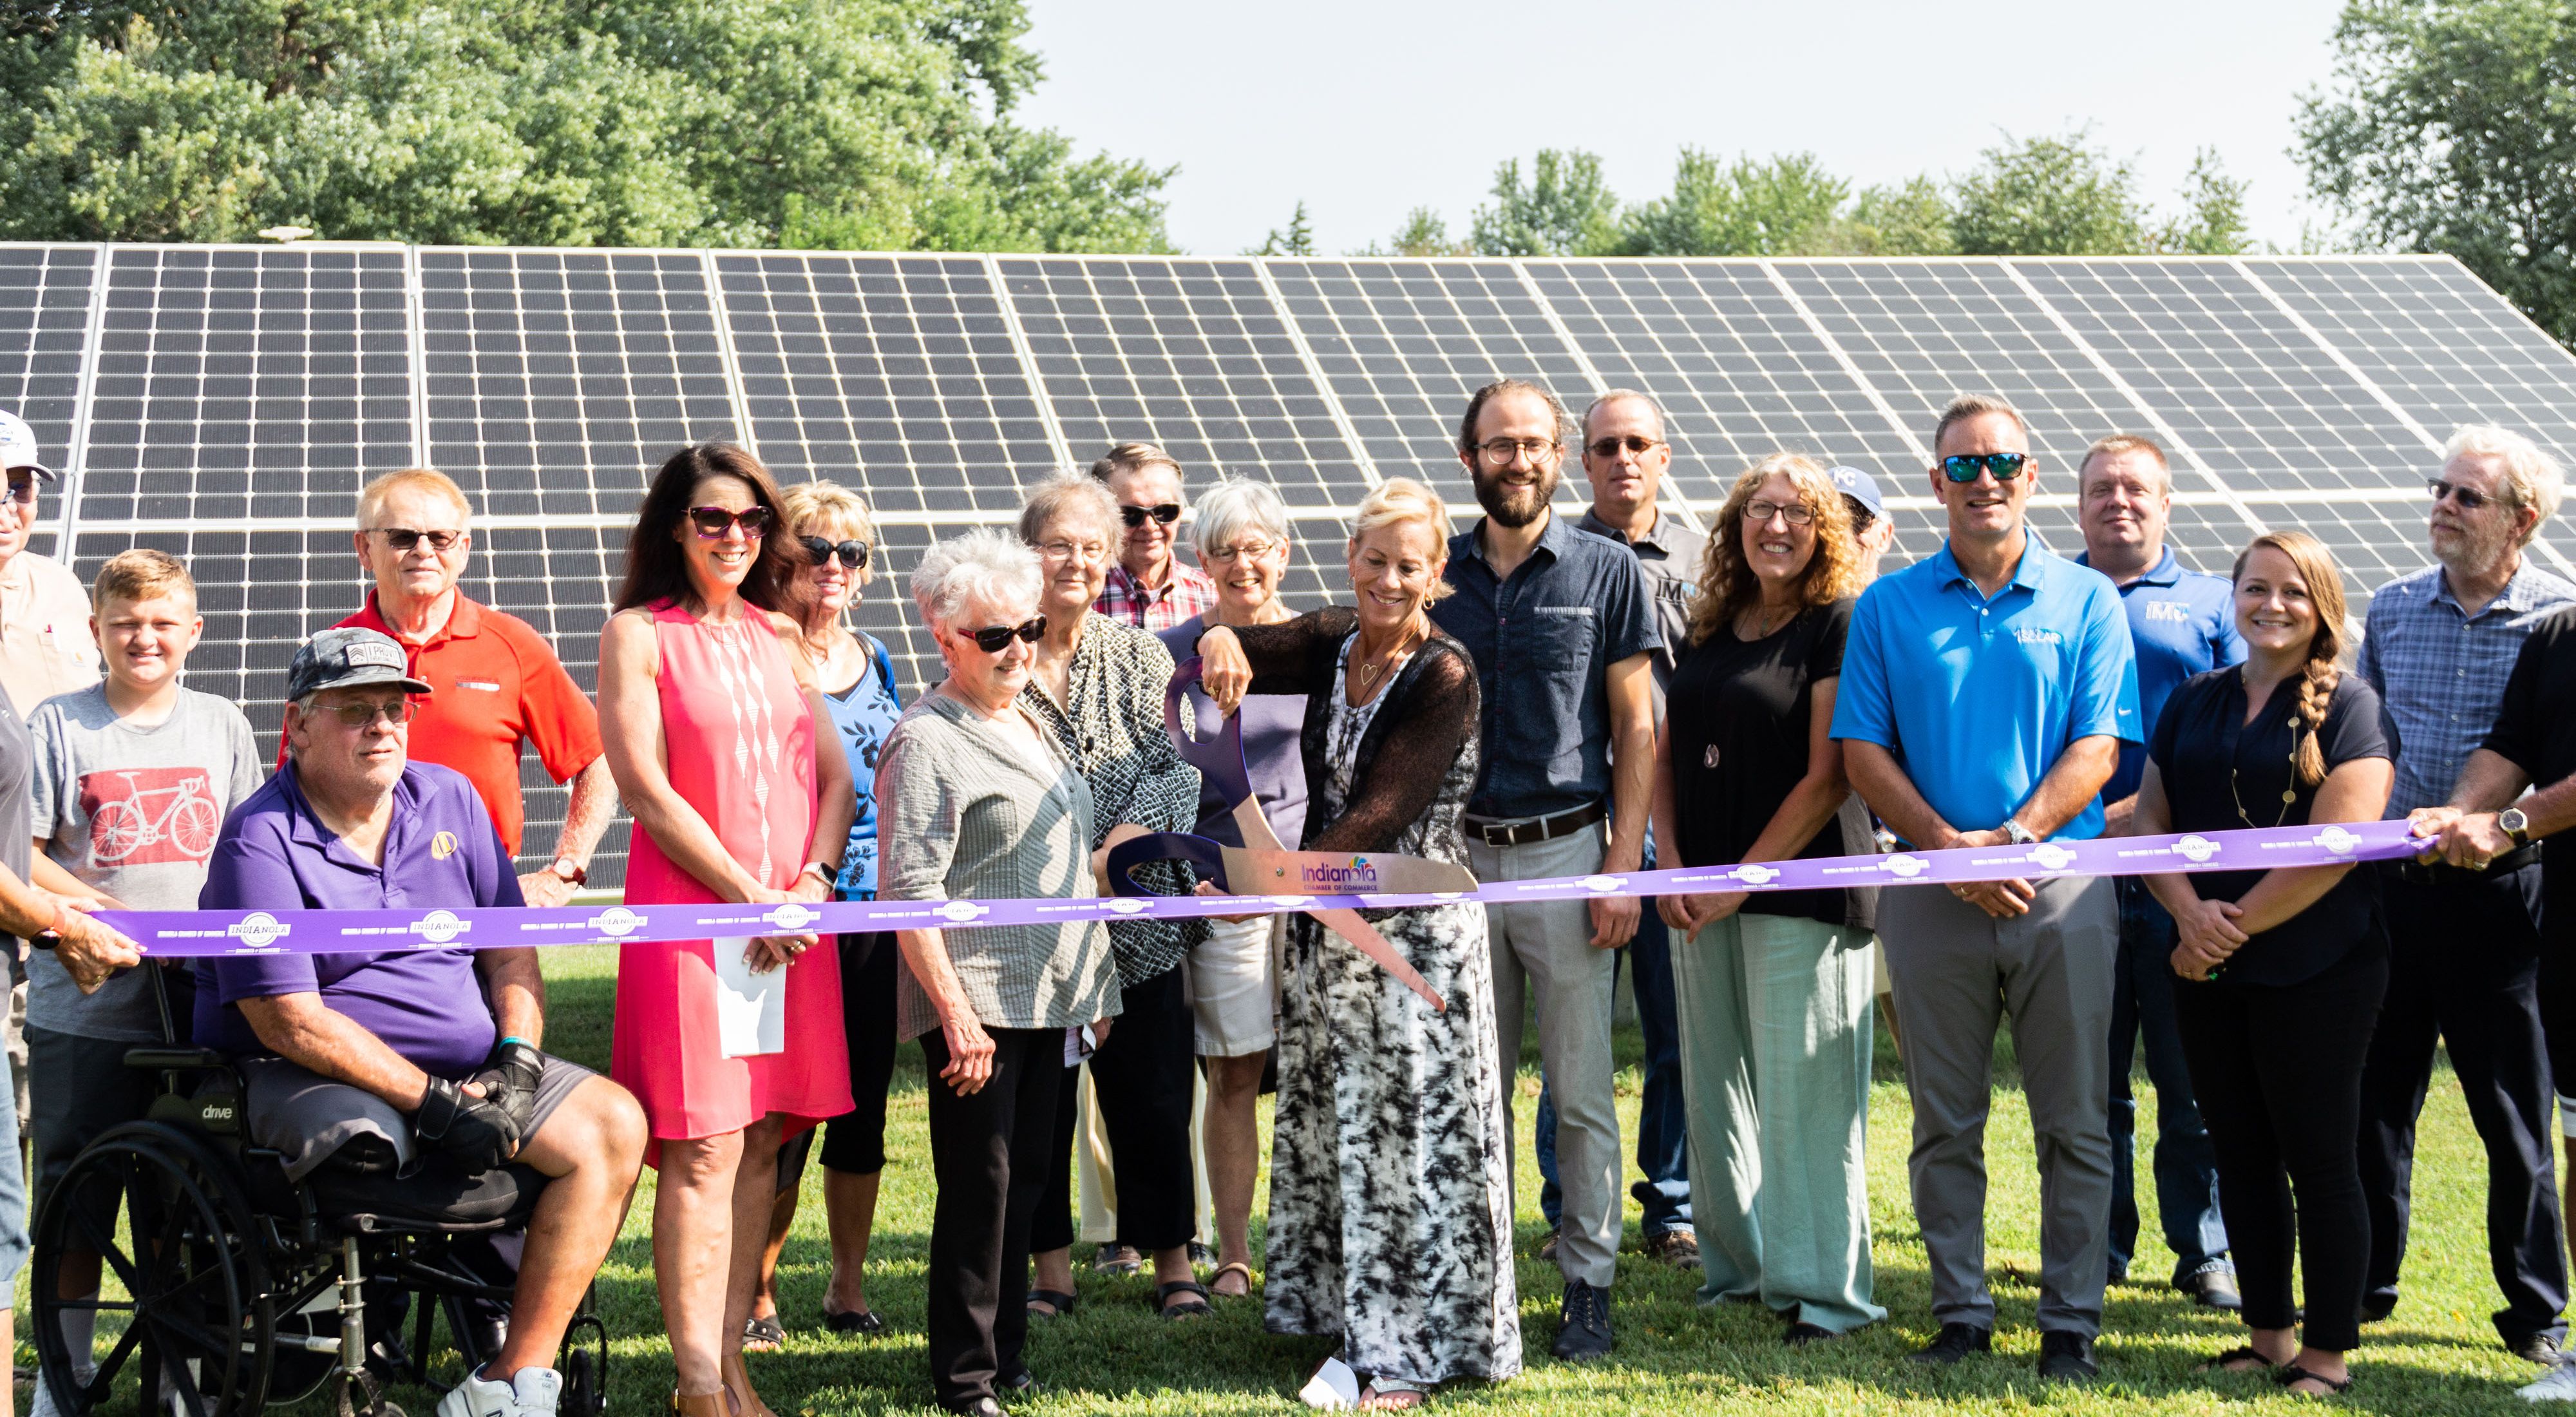 A group of more than a dozen adults gather in front of solar panels, while a person in the front center uses a giant pair of scissors to cut a purple ribbon that extends across the group.